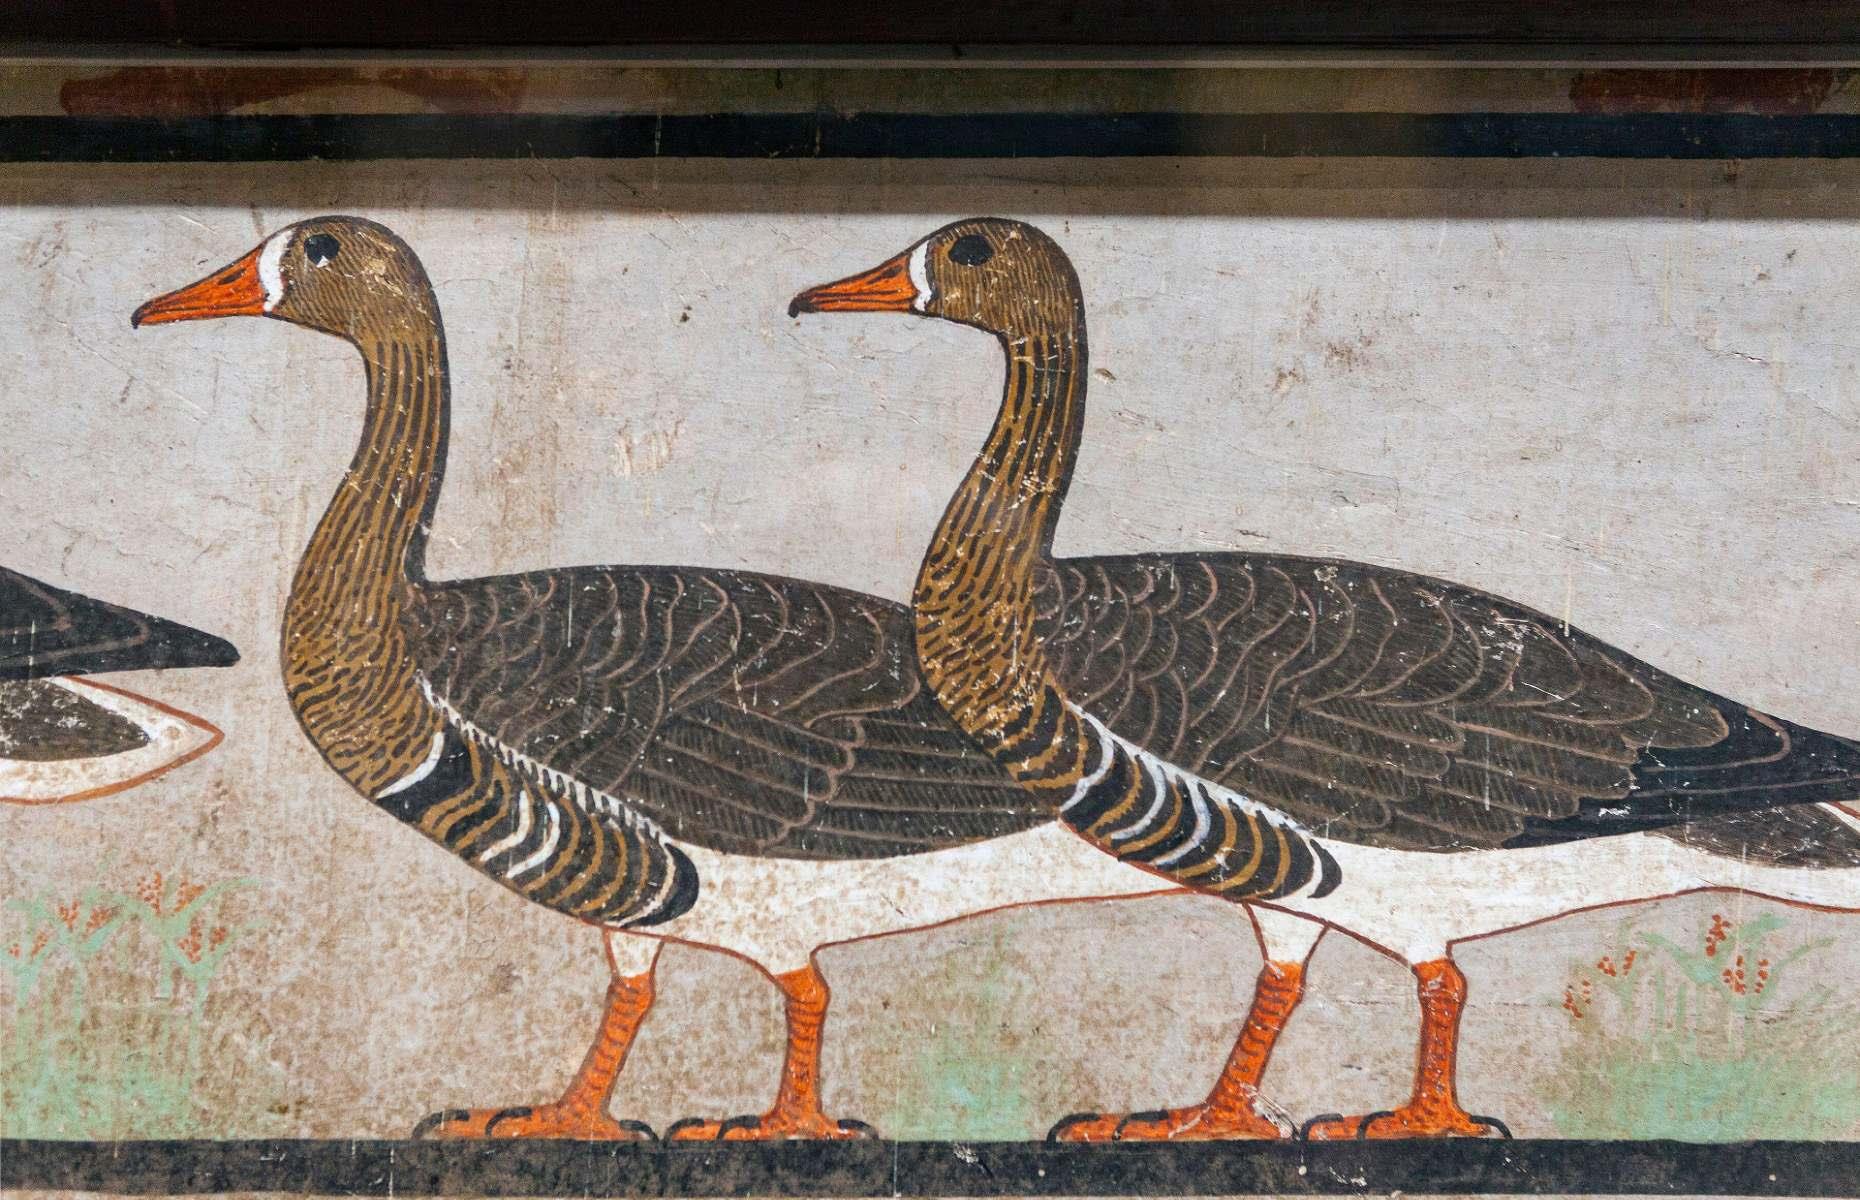 <p>Although a faster paint-and-plaster approach was applied, you can still admire the exceptional level of detail. It was discovered on the north wall in the tomb chapel of Itet, daughter-in-law of King Snerefru and wife to his son, Nerfermaat. The original wall painting is on display at the Egyptian Museum of Cairo, and would have been part of a larger scene in the tomb. There’s also a replica on display at the Metropolitan Museum of Art in New York, US.</p>  <p><a href="https://www.loveexploring.com/gallerylist/90108/the-bent-pyramid-and-other-ancient-egyptian-mysteries"><strong>Learn more about the Bent Pyramid and other Ancient Egyptian mysteries</strong></a></p>